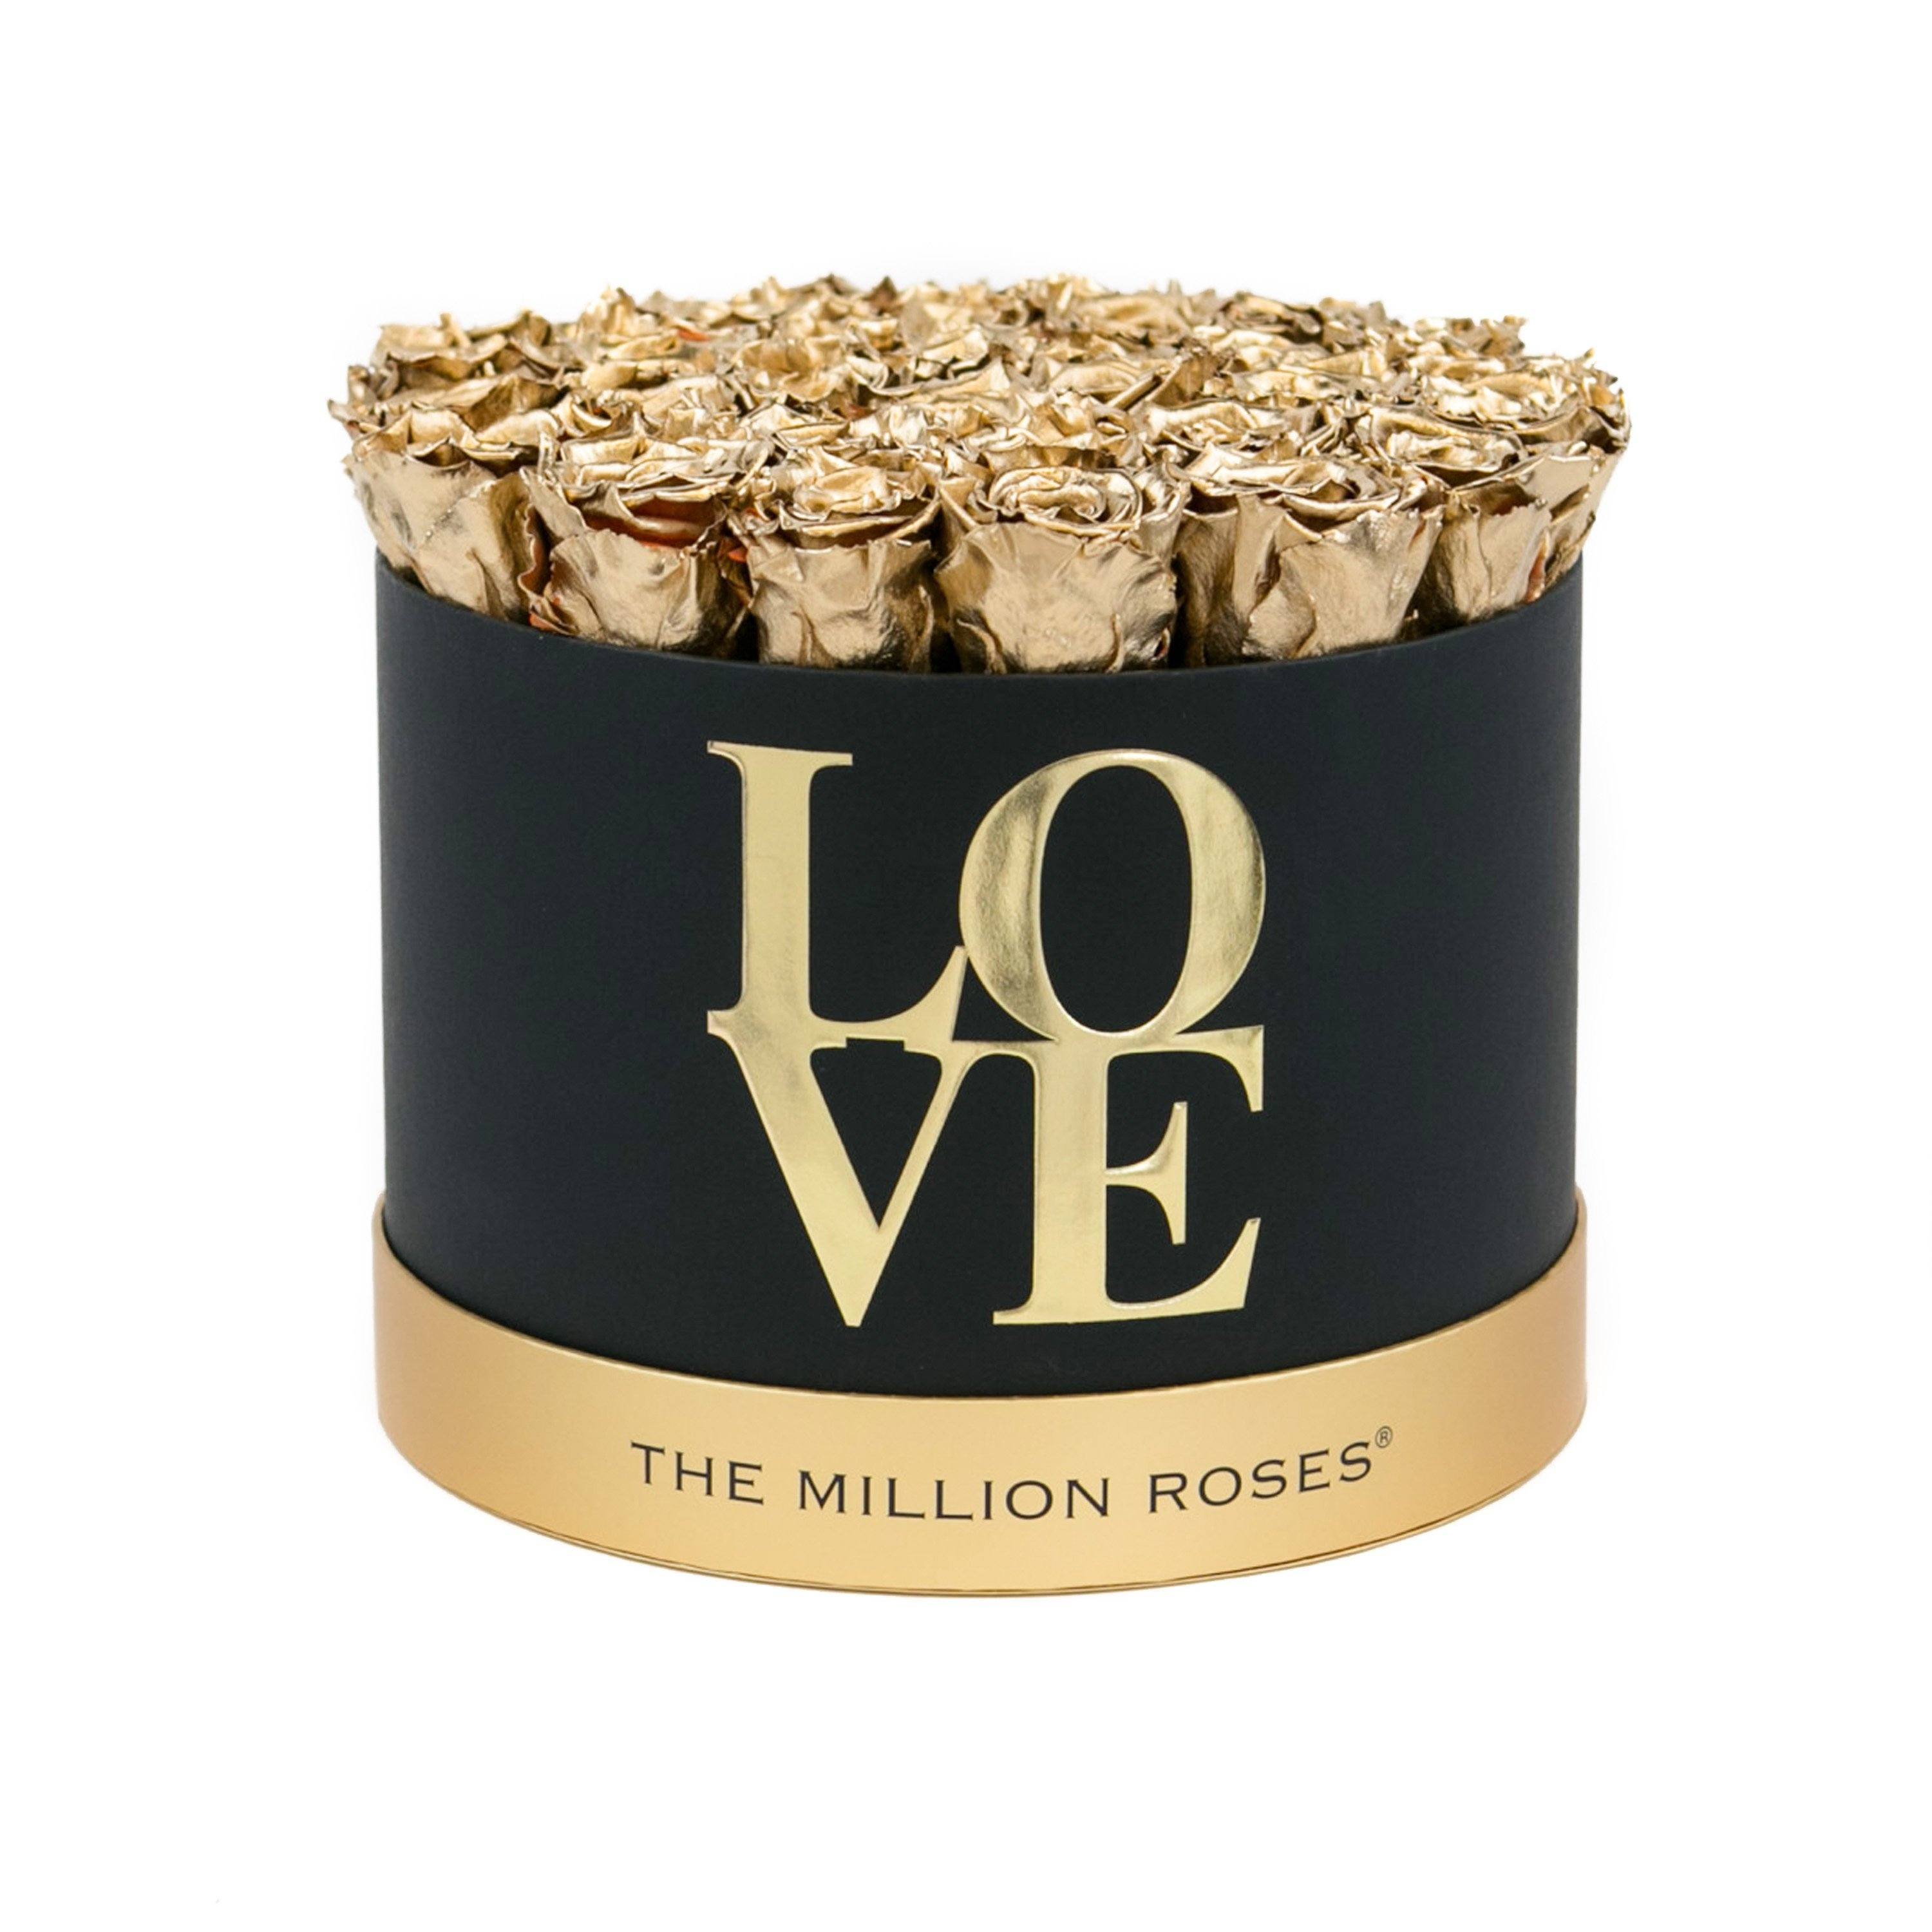 the million roses medium round box - "Love Collection" limited edition "LOVE" - GOLD ROSES gold eternity roses - the million roses